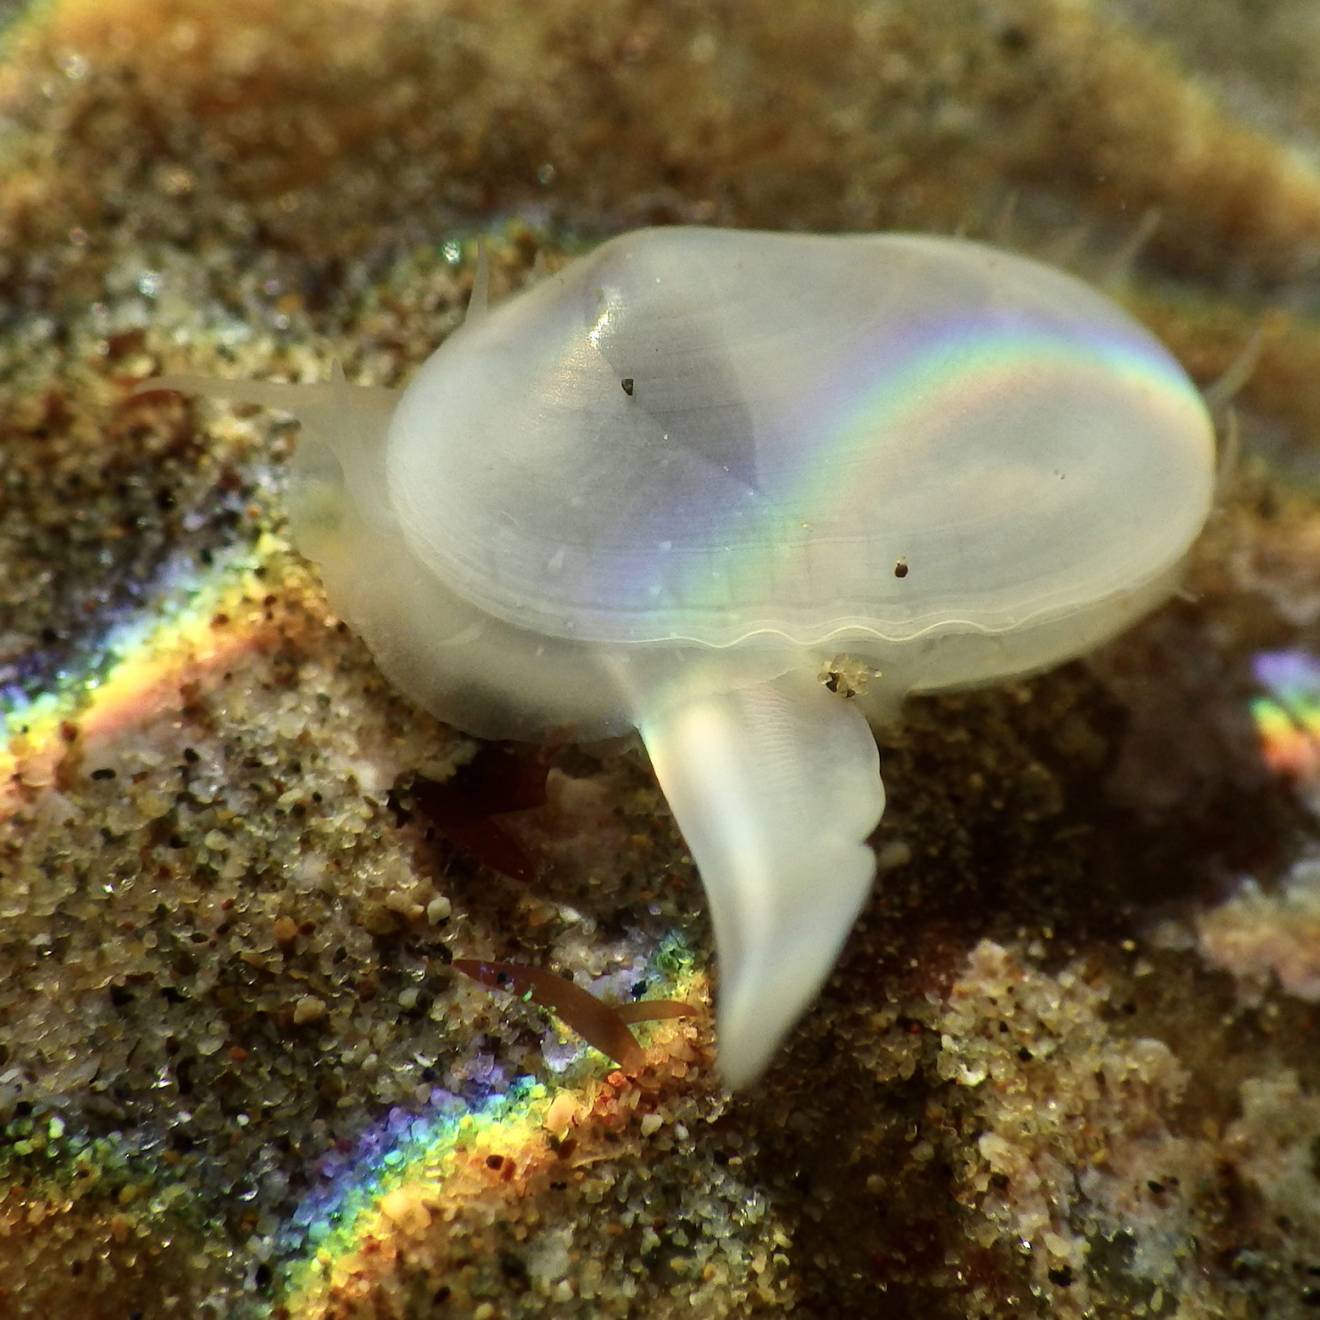 A little pale white clam underwater